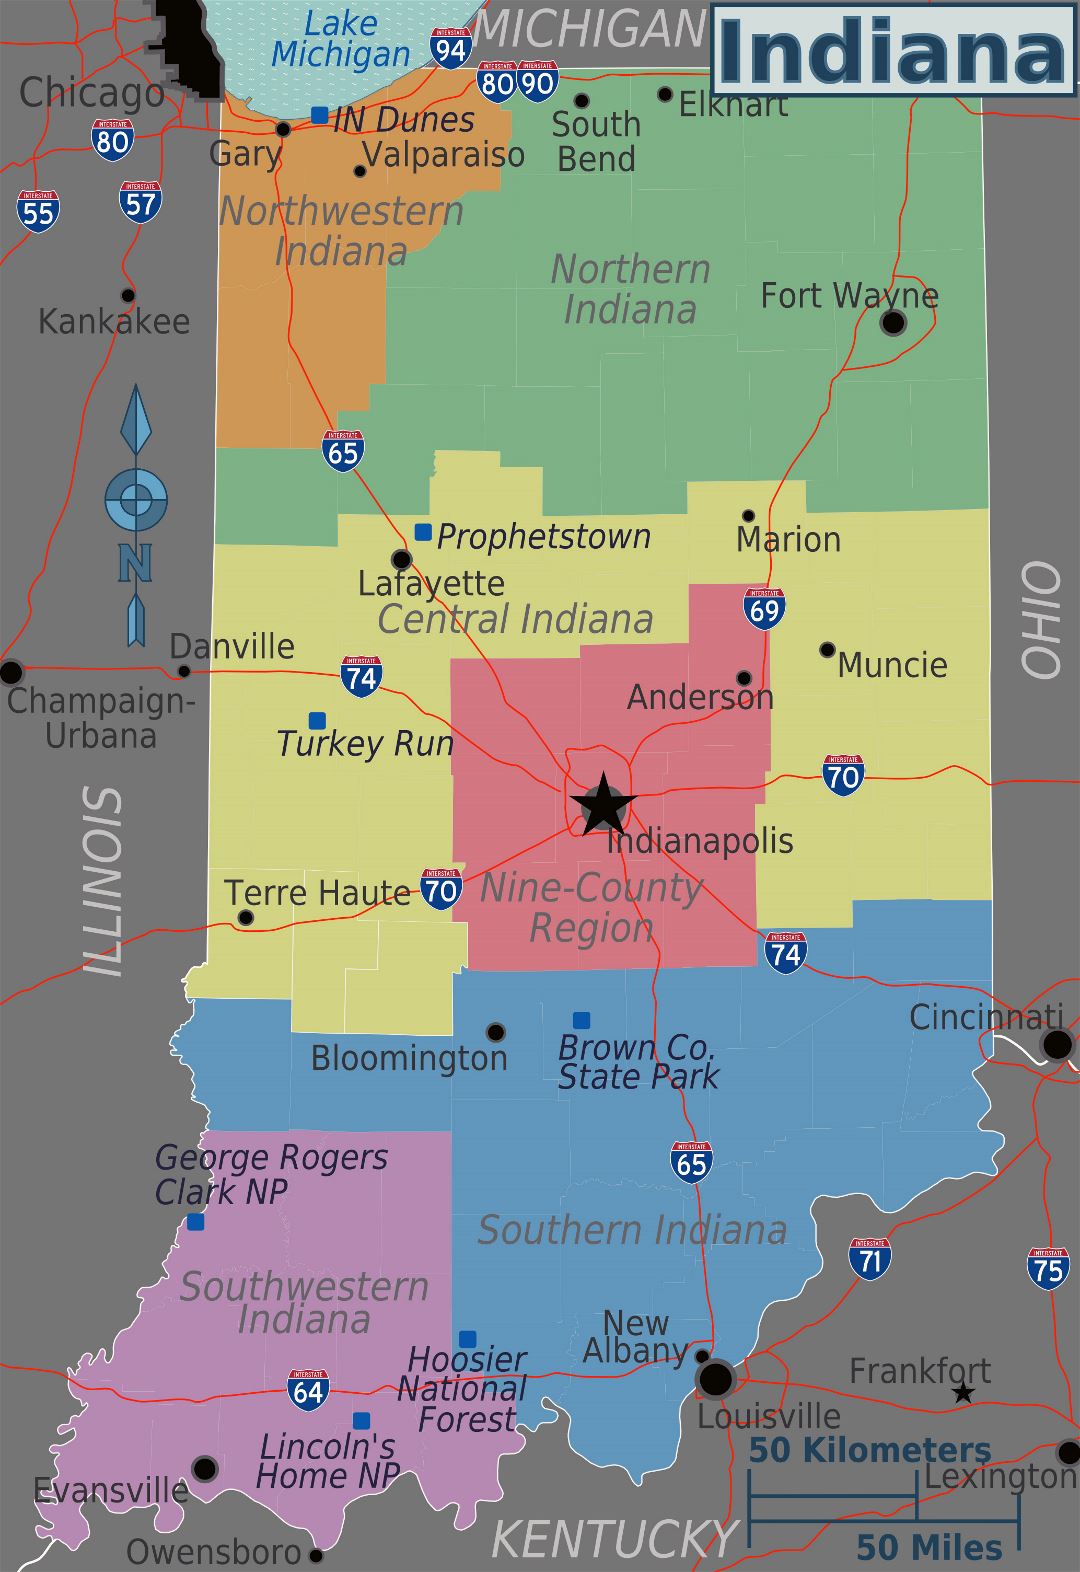 Large regions map of Indiana state